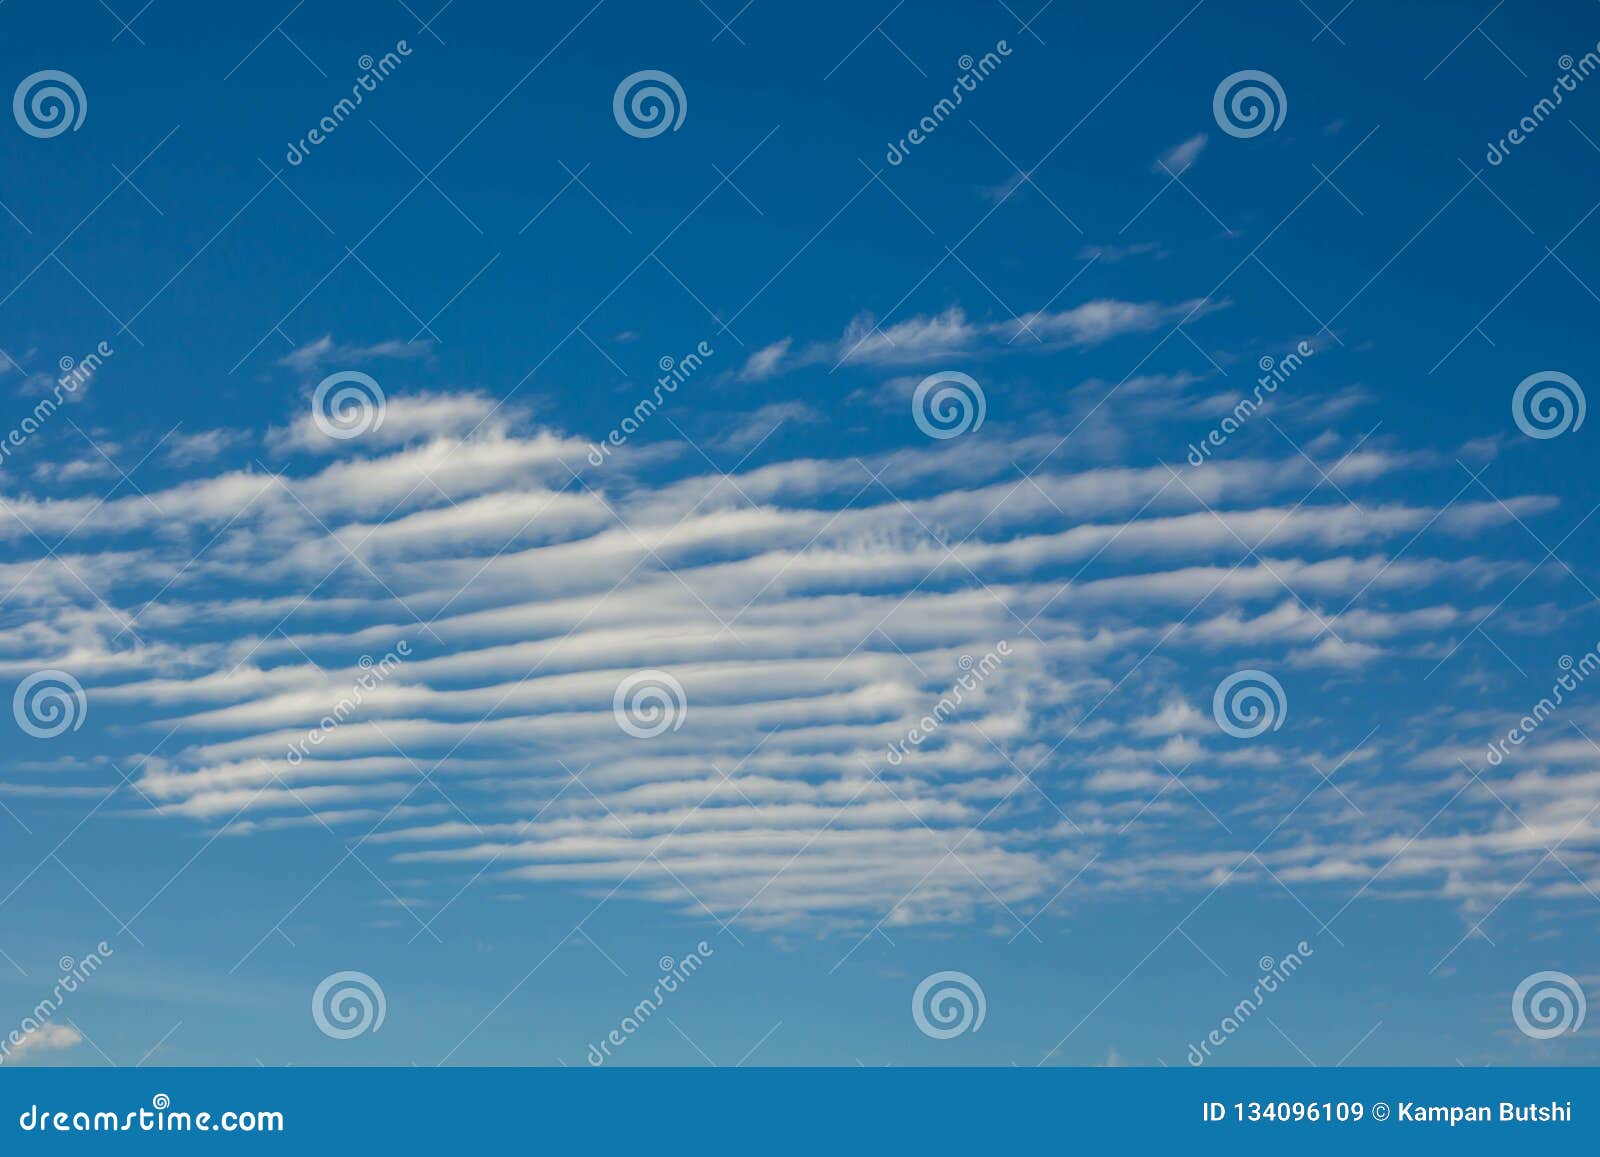 Clouds formed is lines analogous the desert.